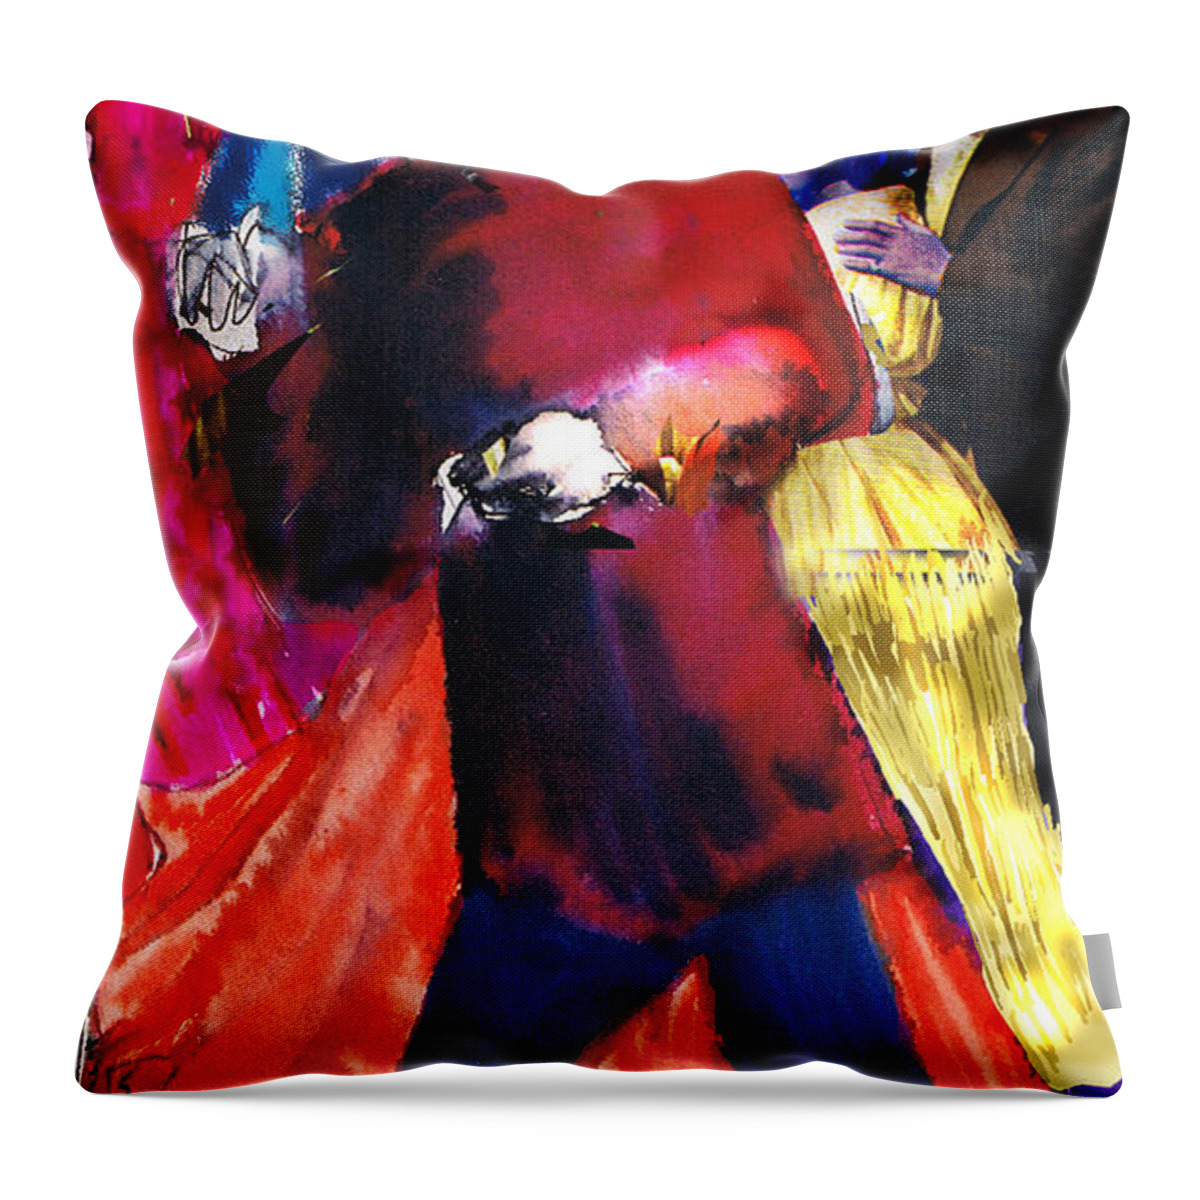 Mixed Media Throw Pillow featuring the photograph The Last Waltz by Seth Weaver